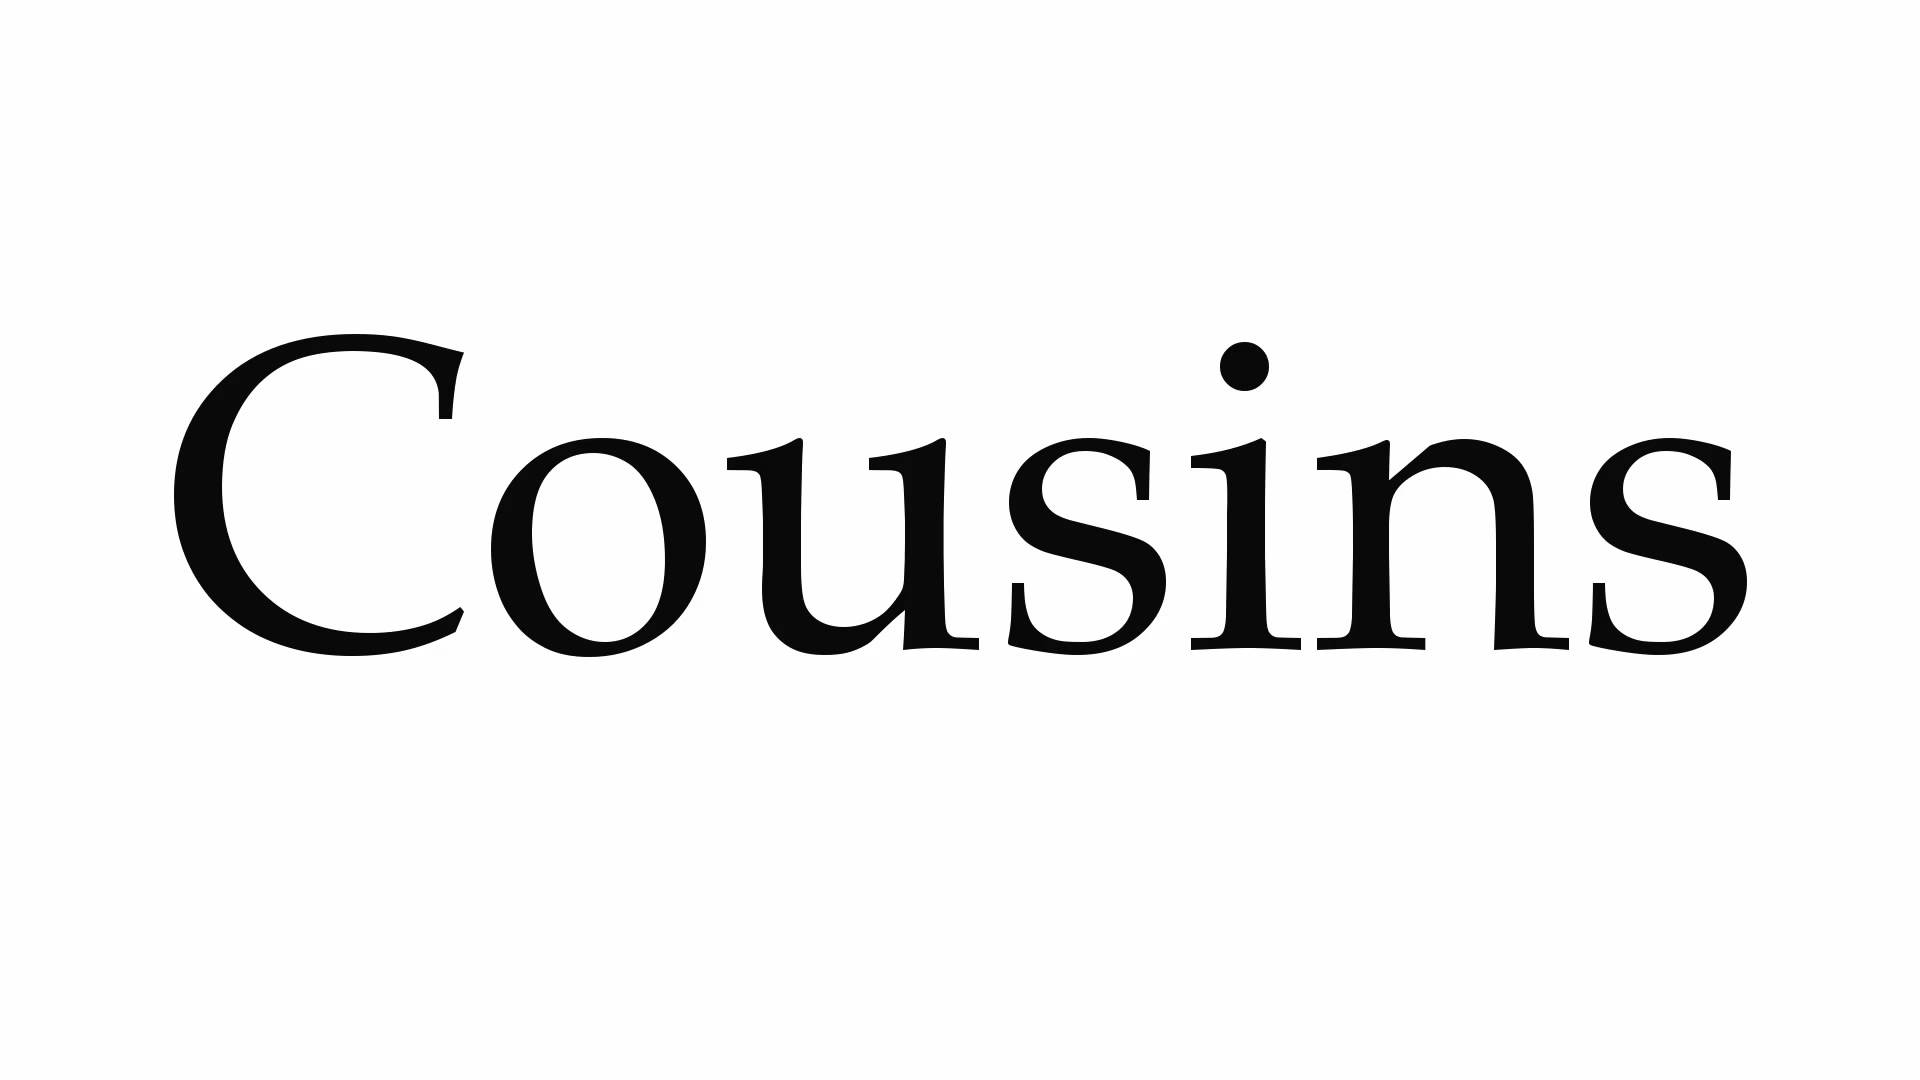 Cousins Image | Free download on ClipArtMag